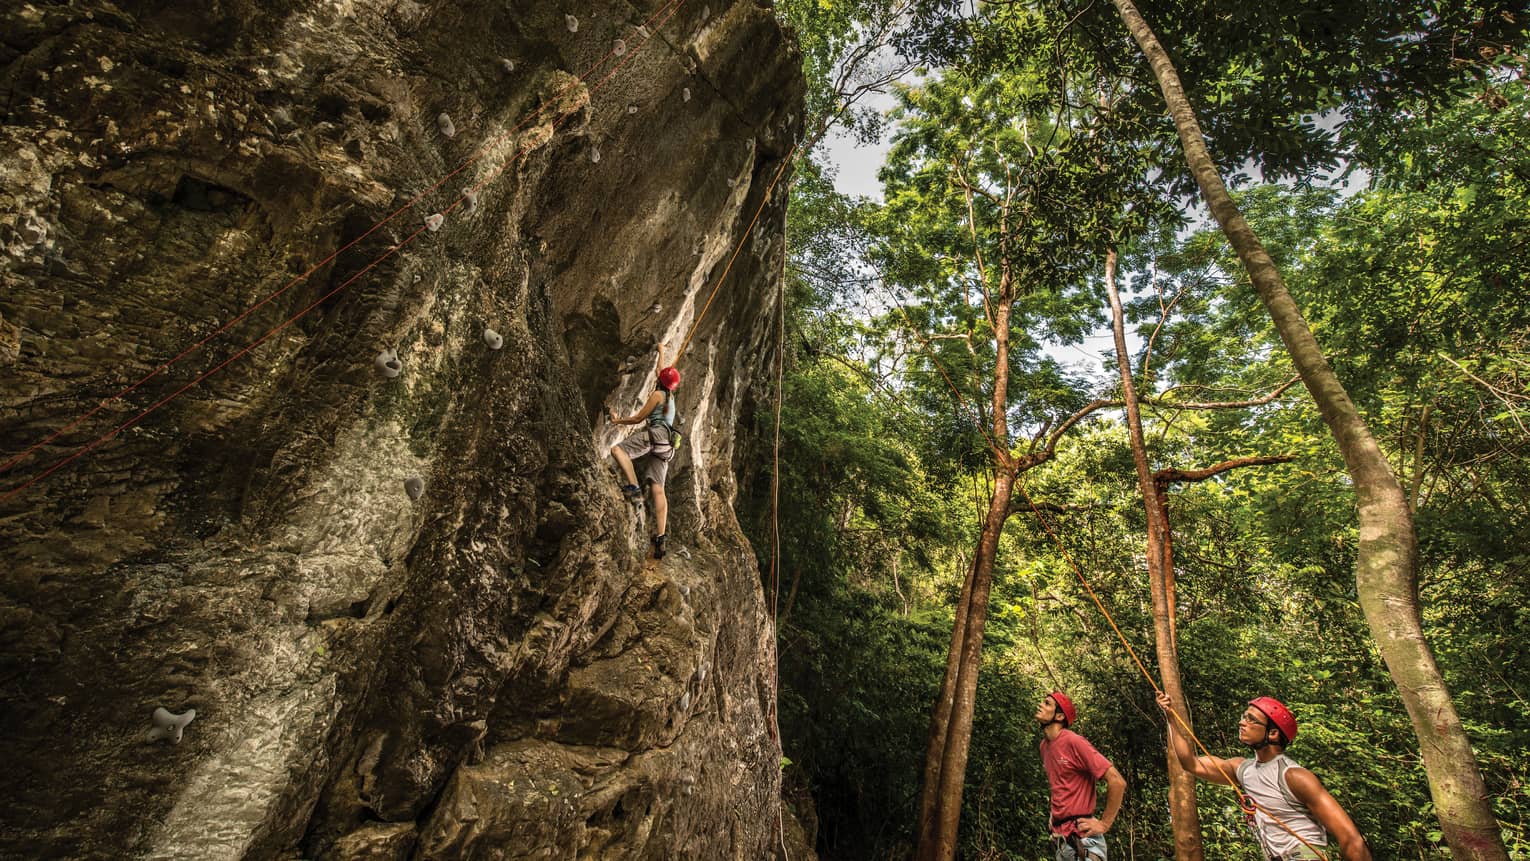 Two men in rock climbing helmets look up as woman scales large rock face